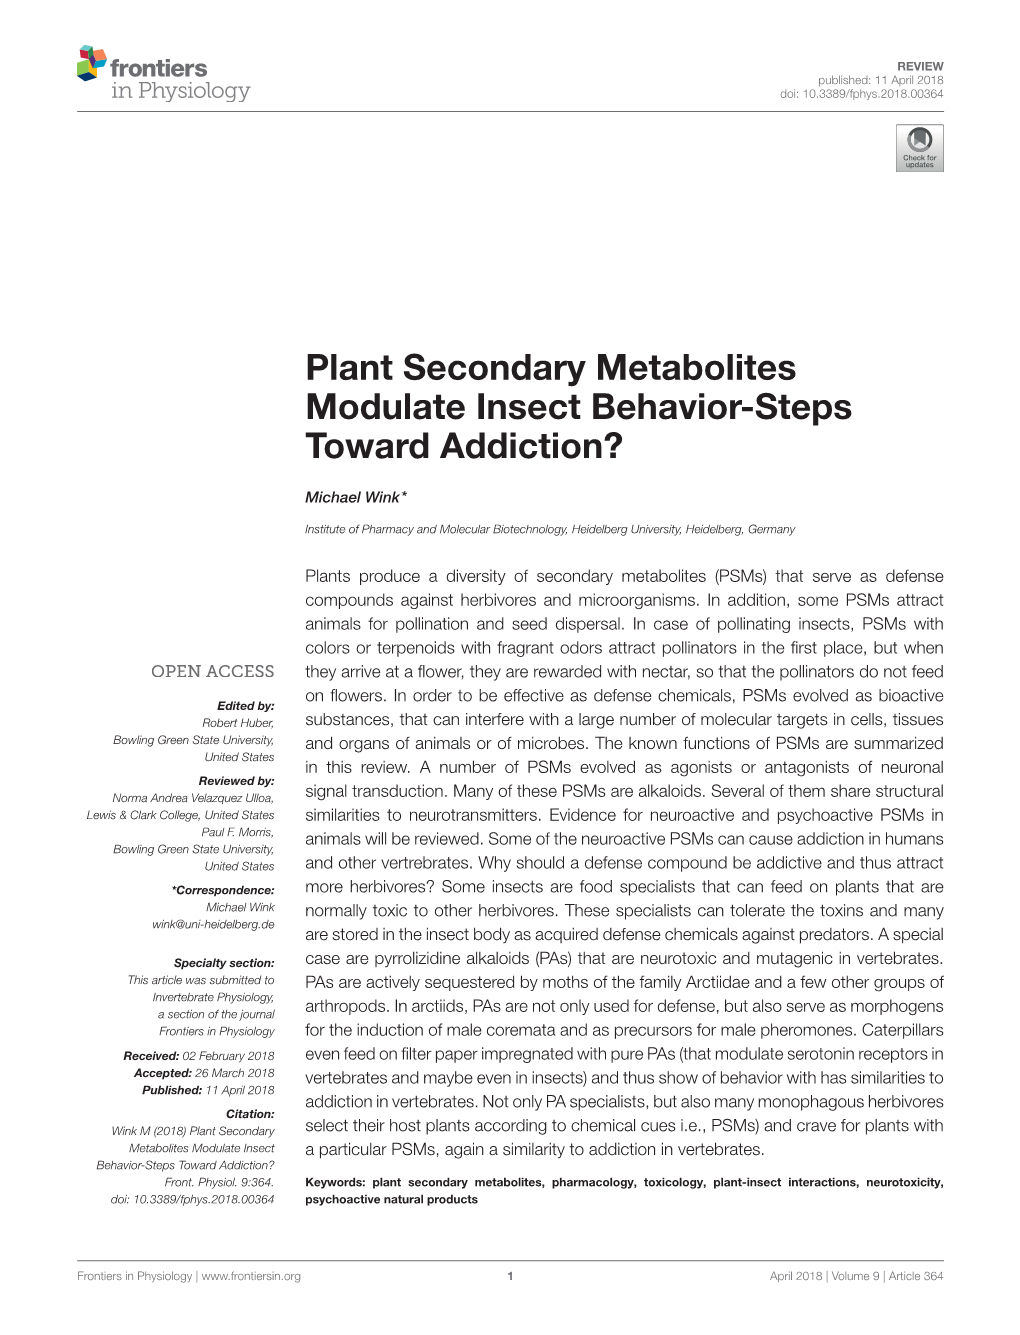 Plant Secondary Metabolites Modulate Insect Behavior-Steps Toward Addiction?